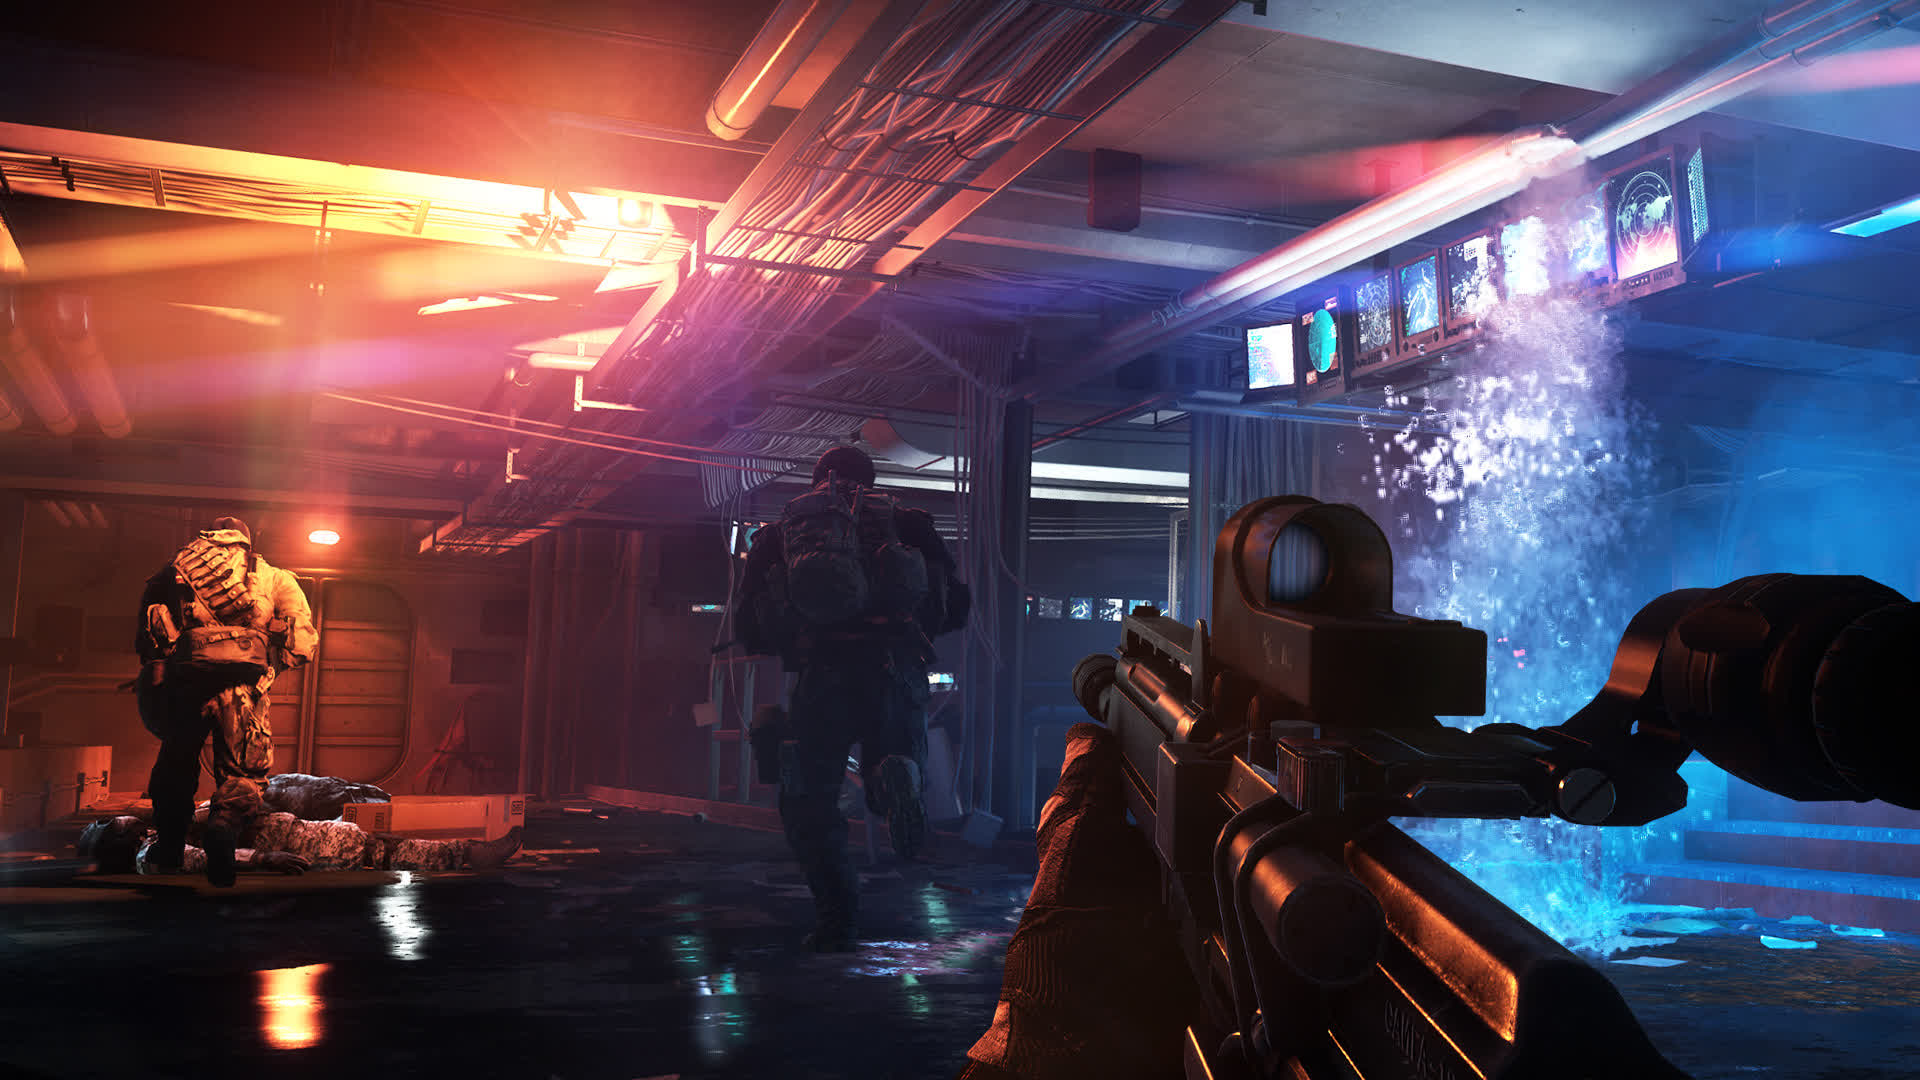 Battlefield 4 has so many players right now that EA had to increase server capacity